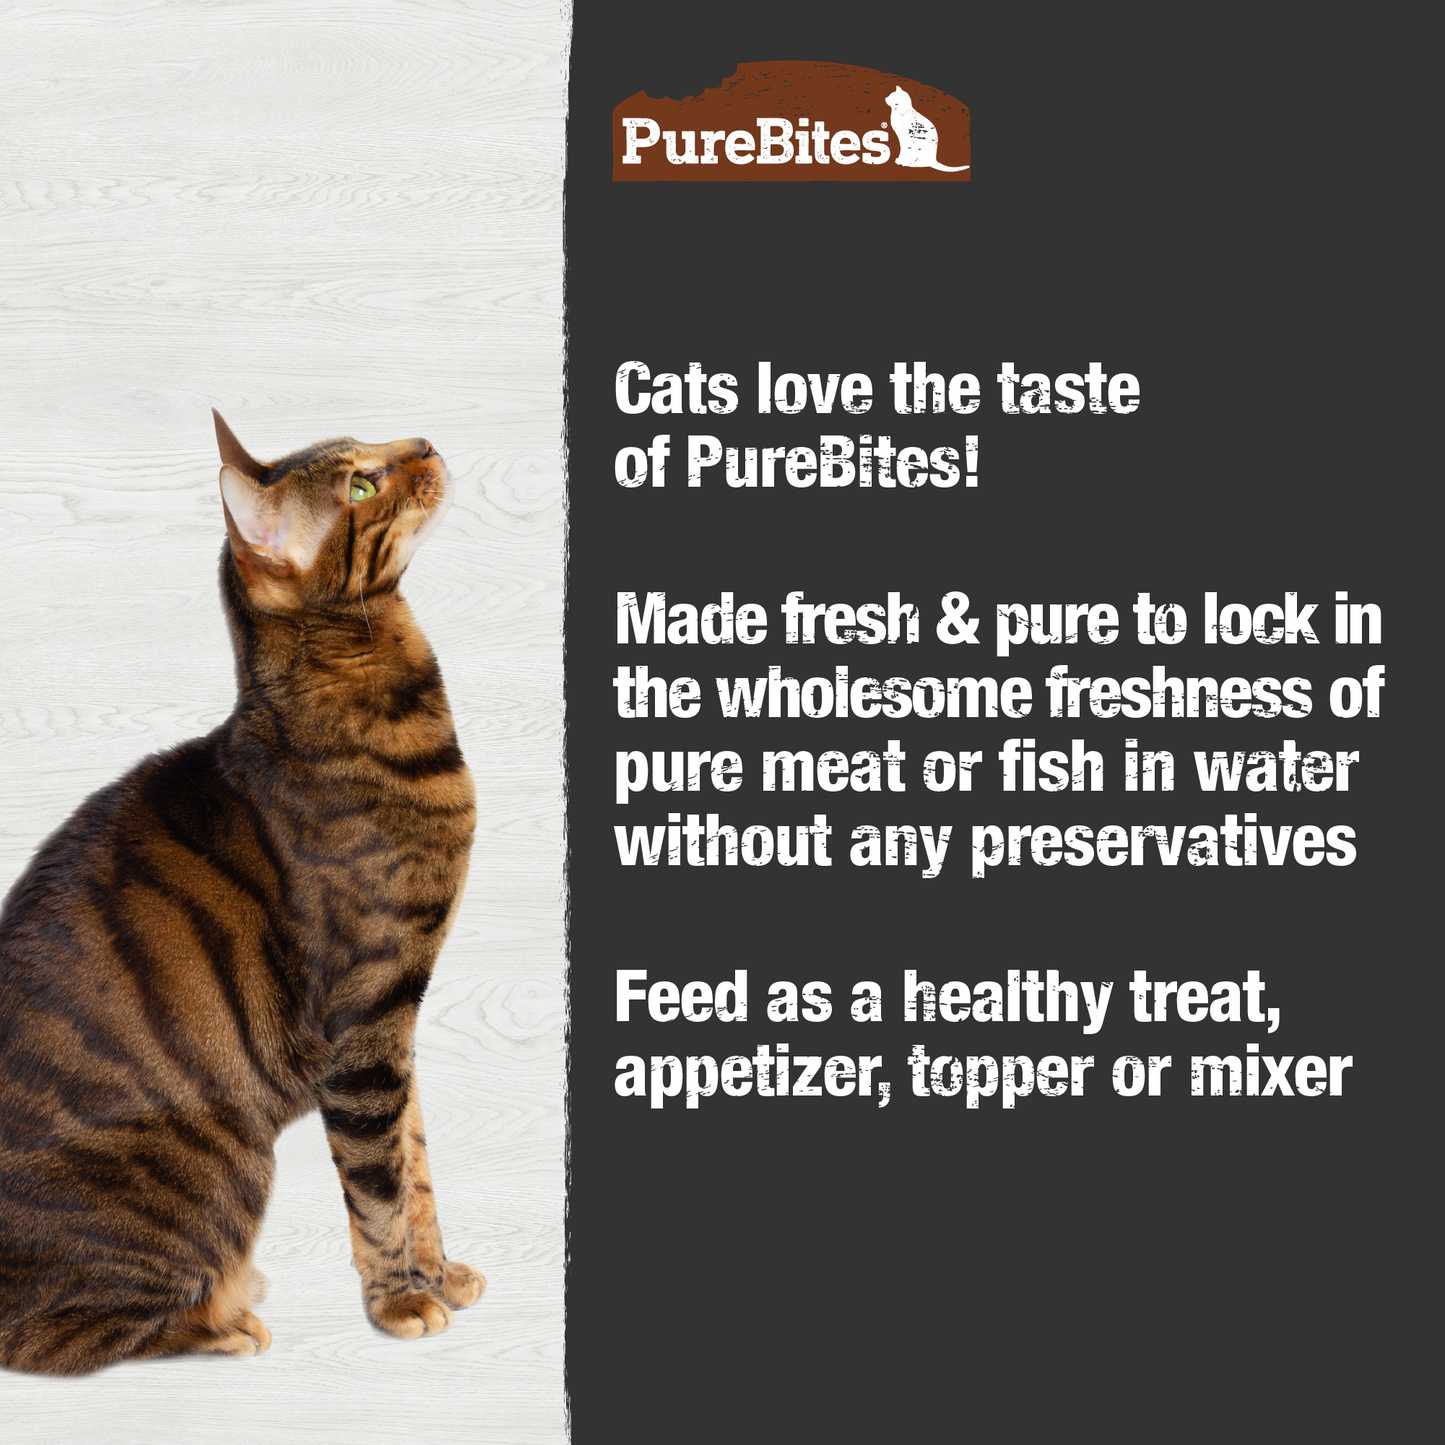 Made fresh & pure means more protein and nutrients packed into every tray. The chicken & tuna in our wet mixers is delicately steamed to help preserve the ingredient's taste, and nutrition, and mirror a cat’s ancestral diet